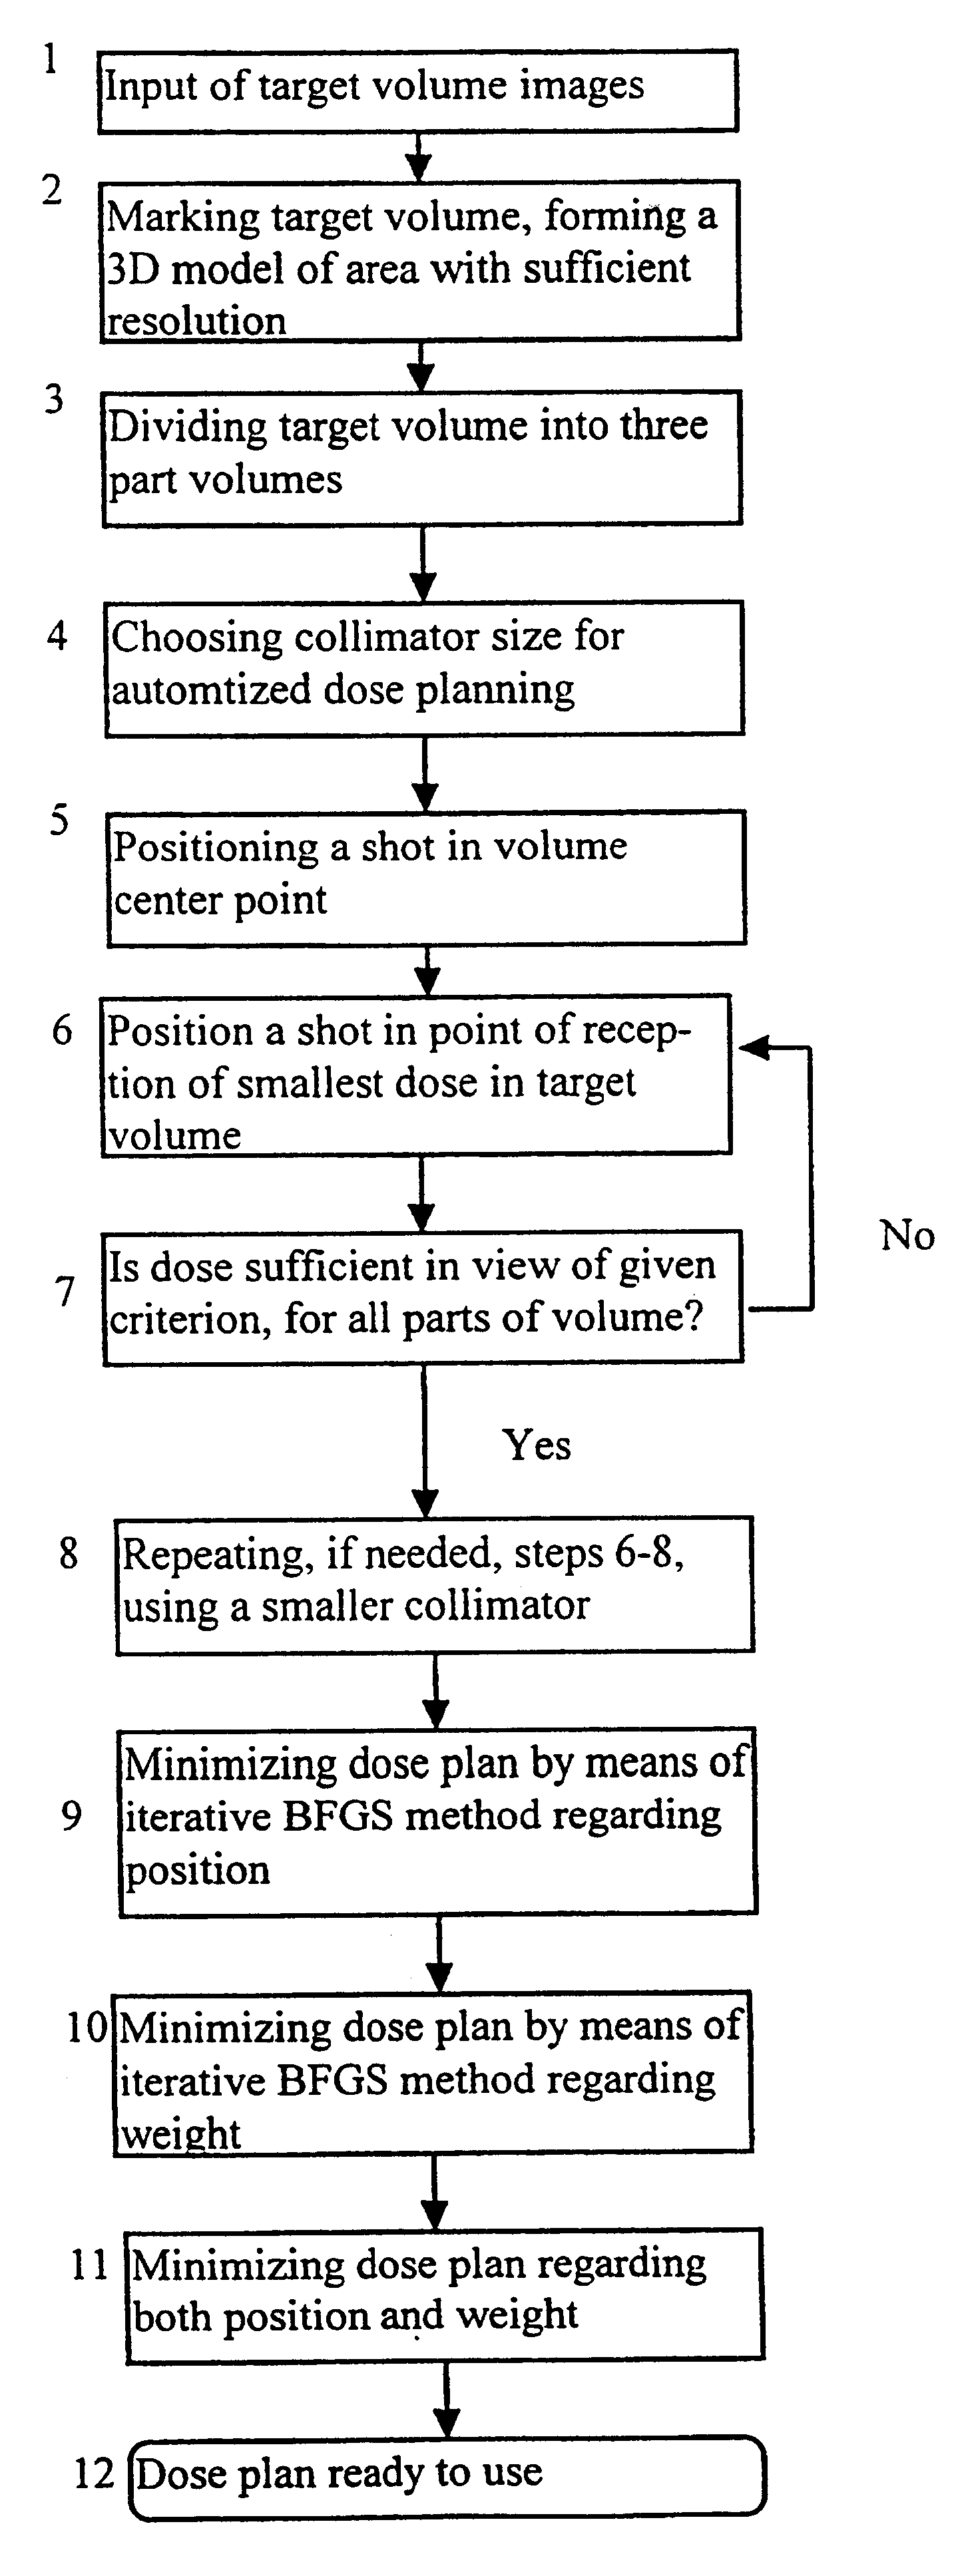 Method for automatized dose planning